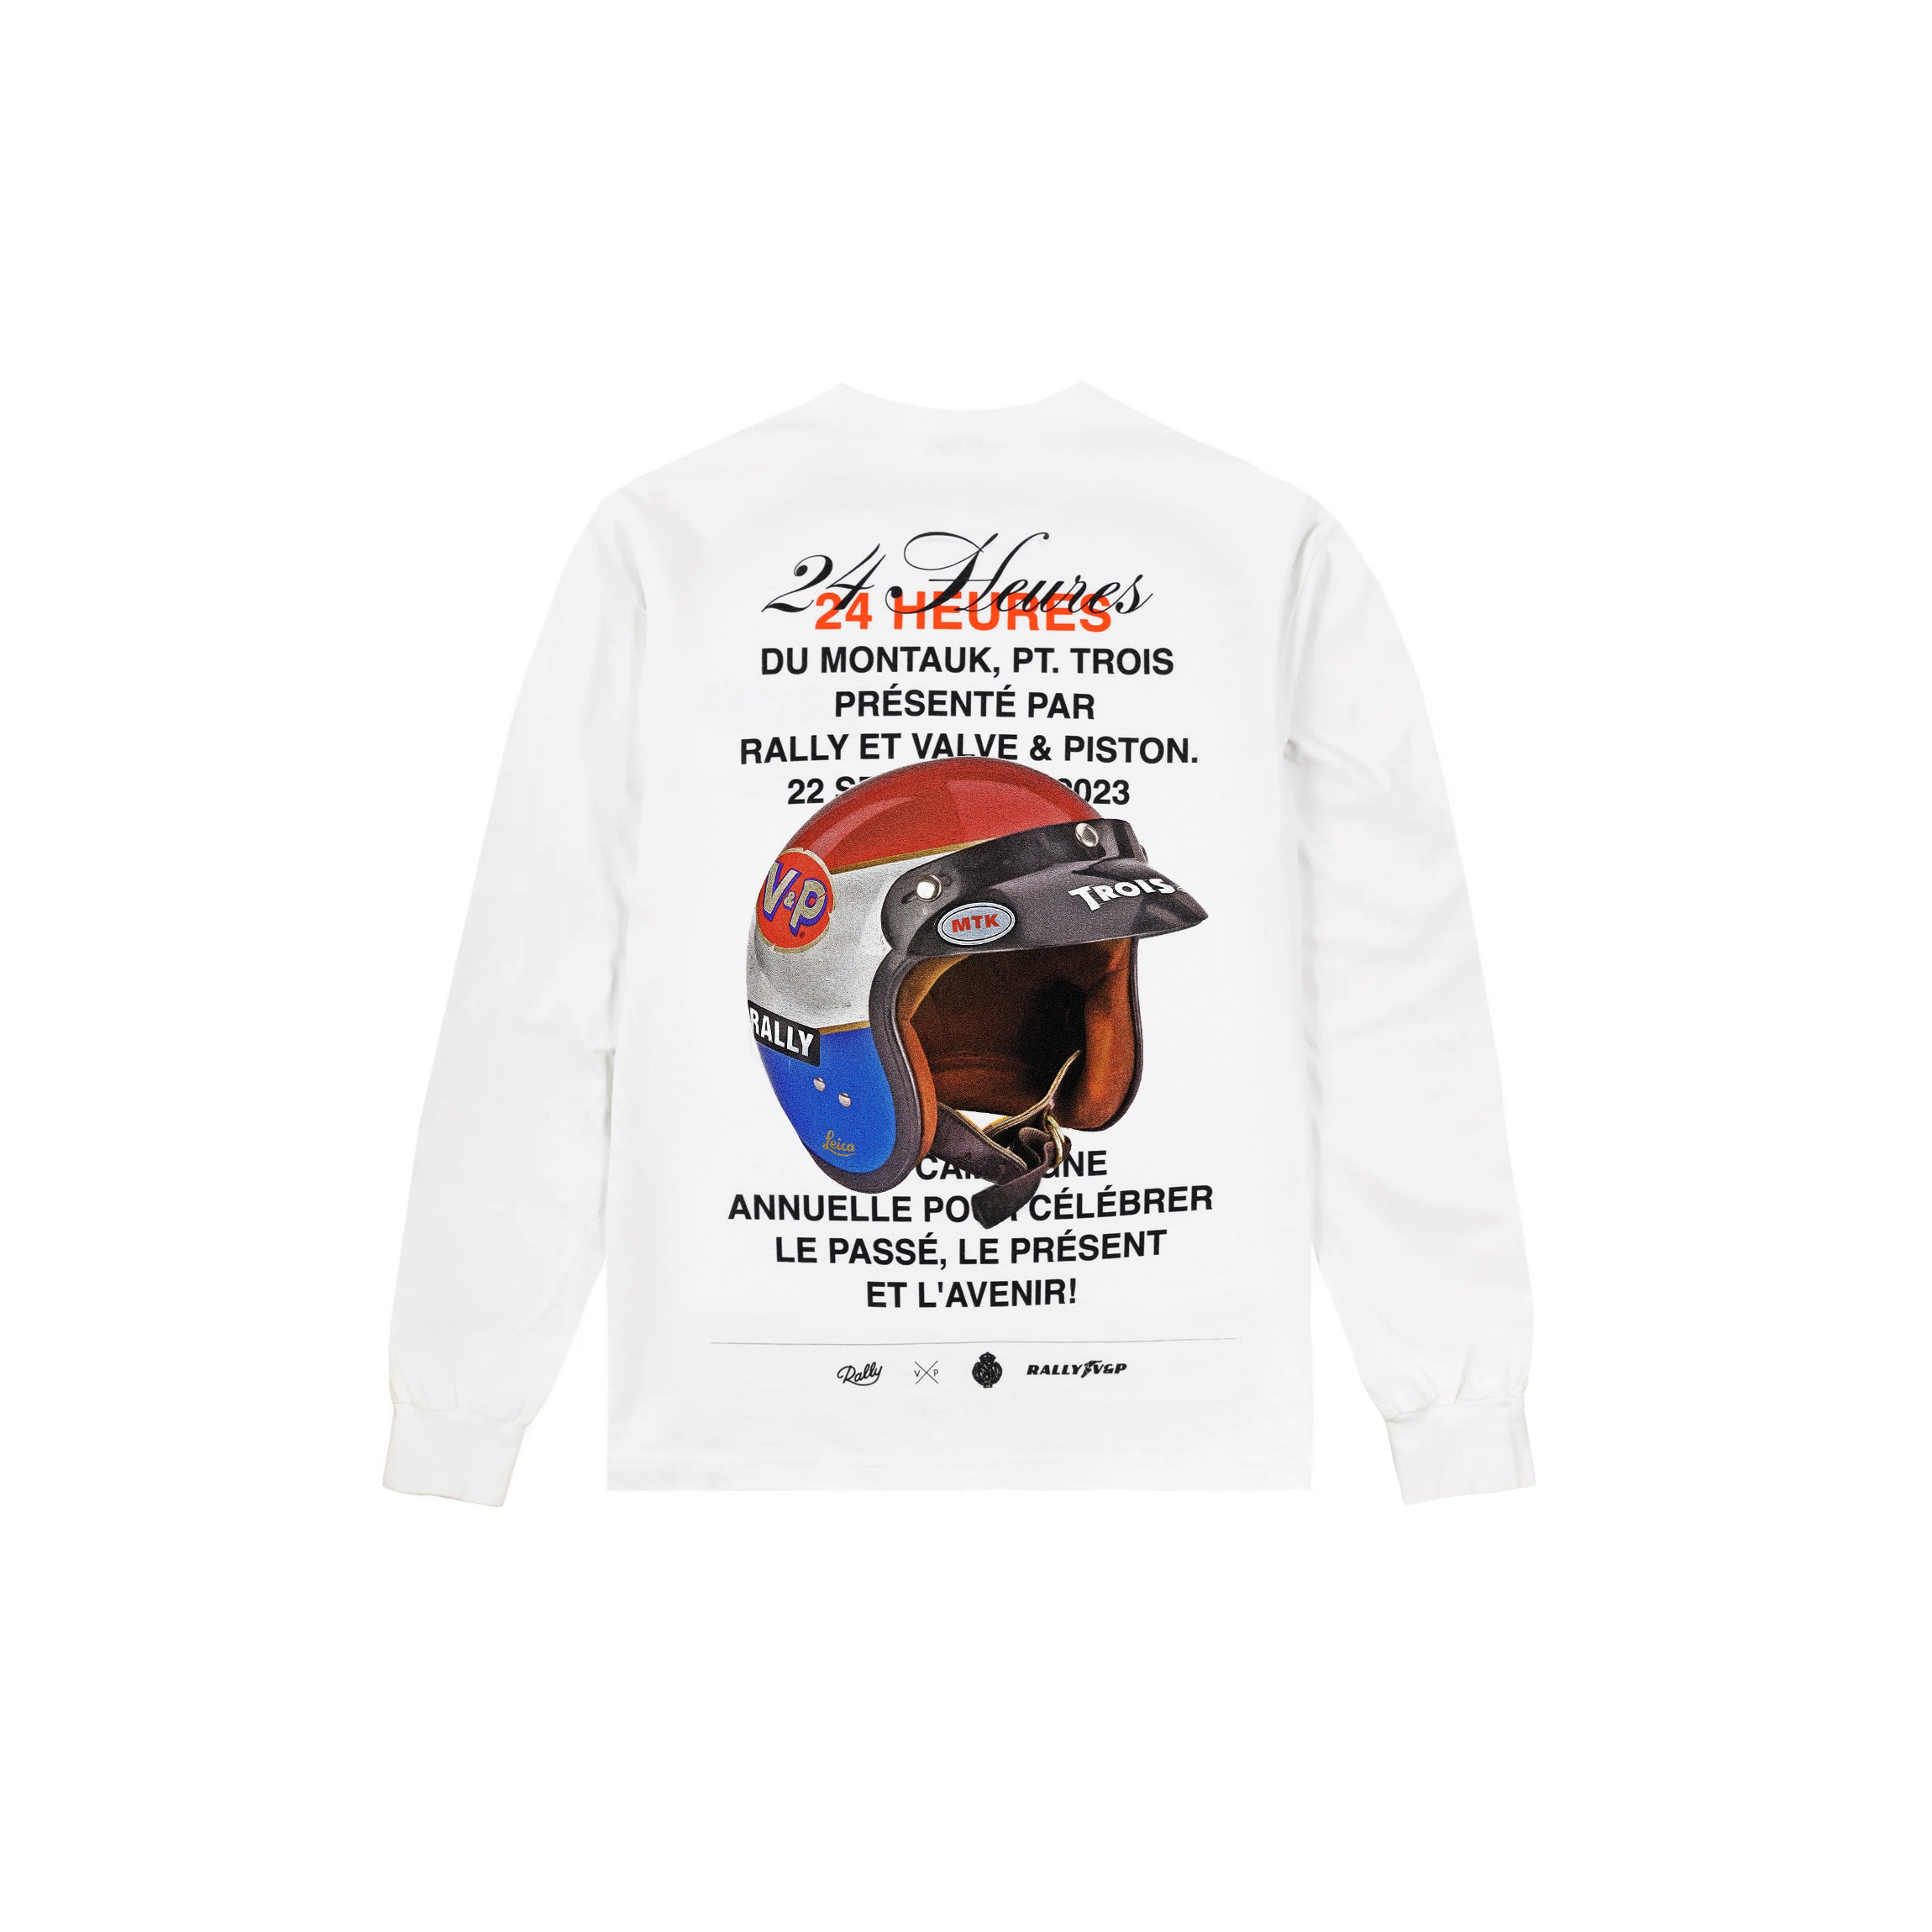 White long sleeve tee with screen printed design in the back featuring the title 24 Heures du Montauk, Pt. Trois + a vintage drivers helmet.